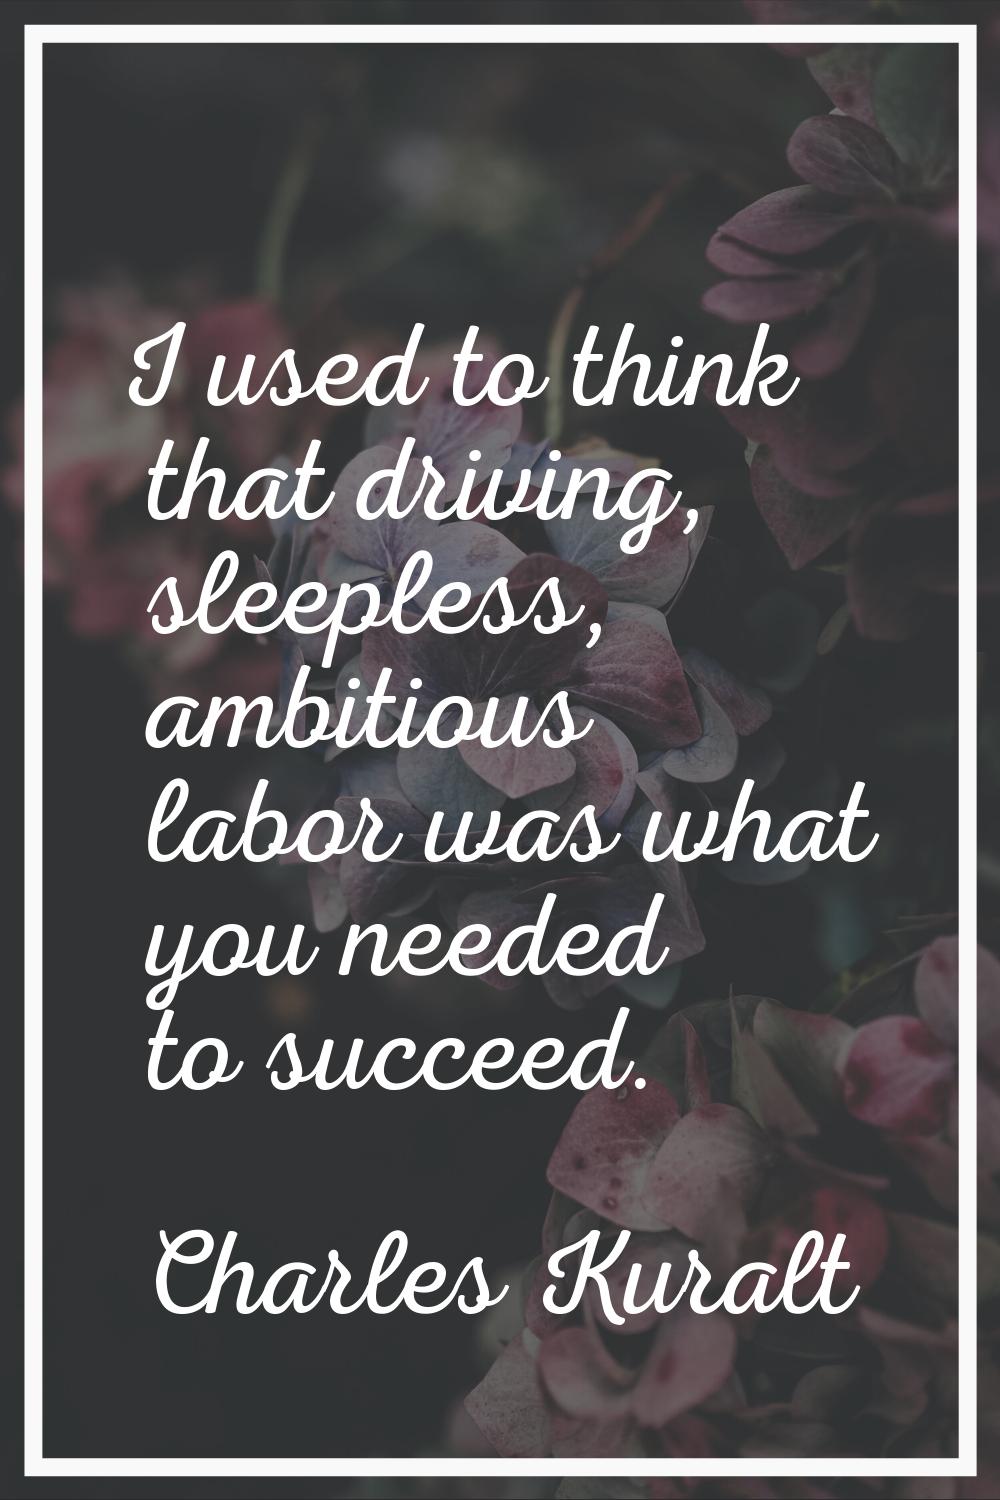 I used to think that driving, sleepless, ambitious labor was what you needed to succeed.